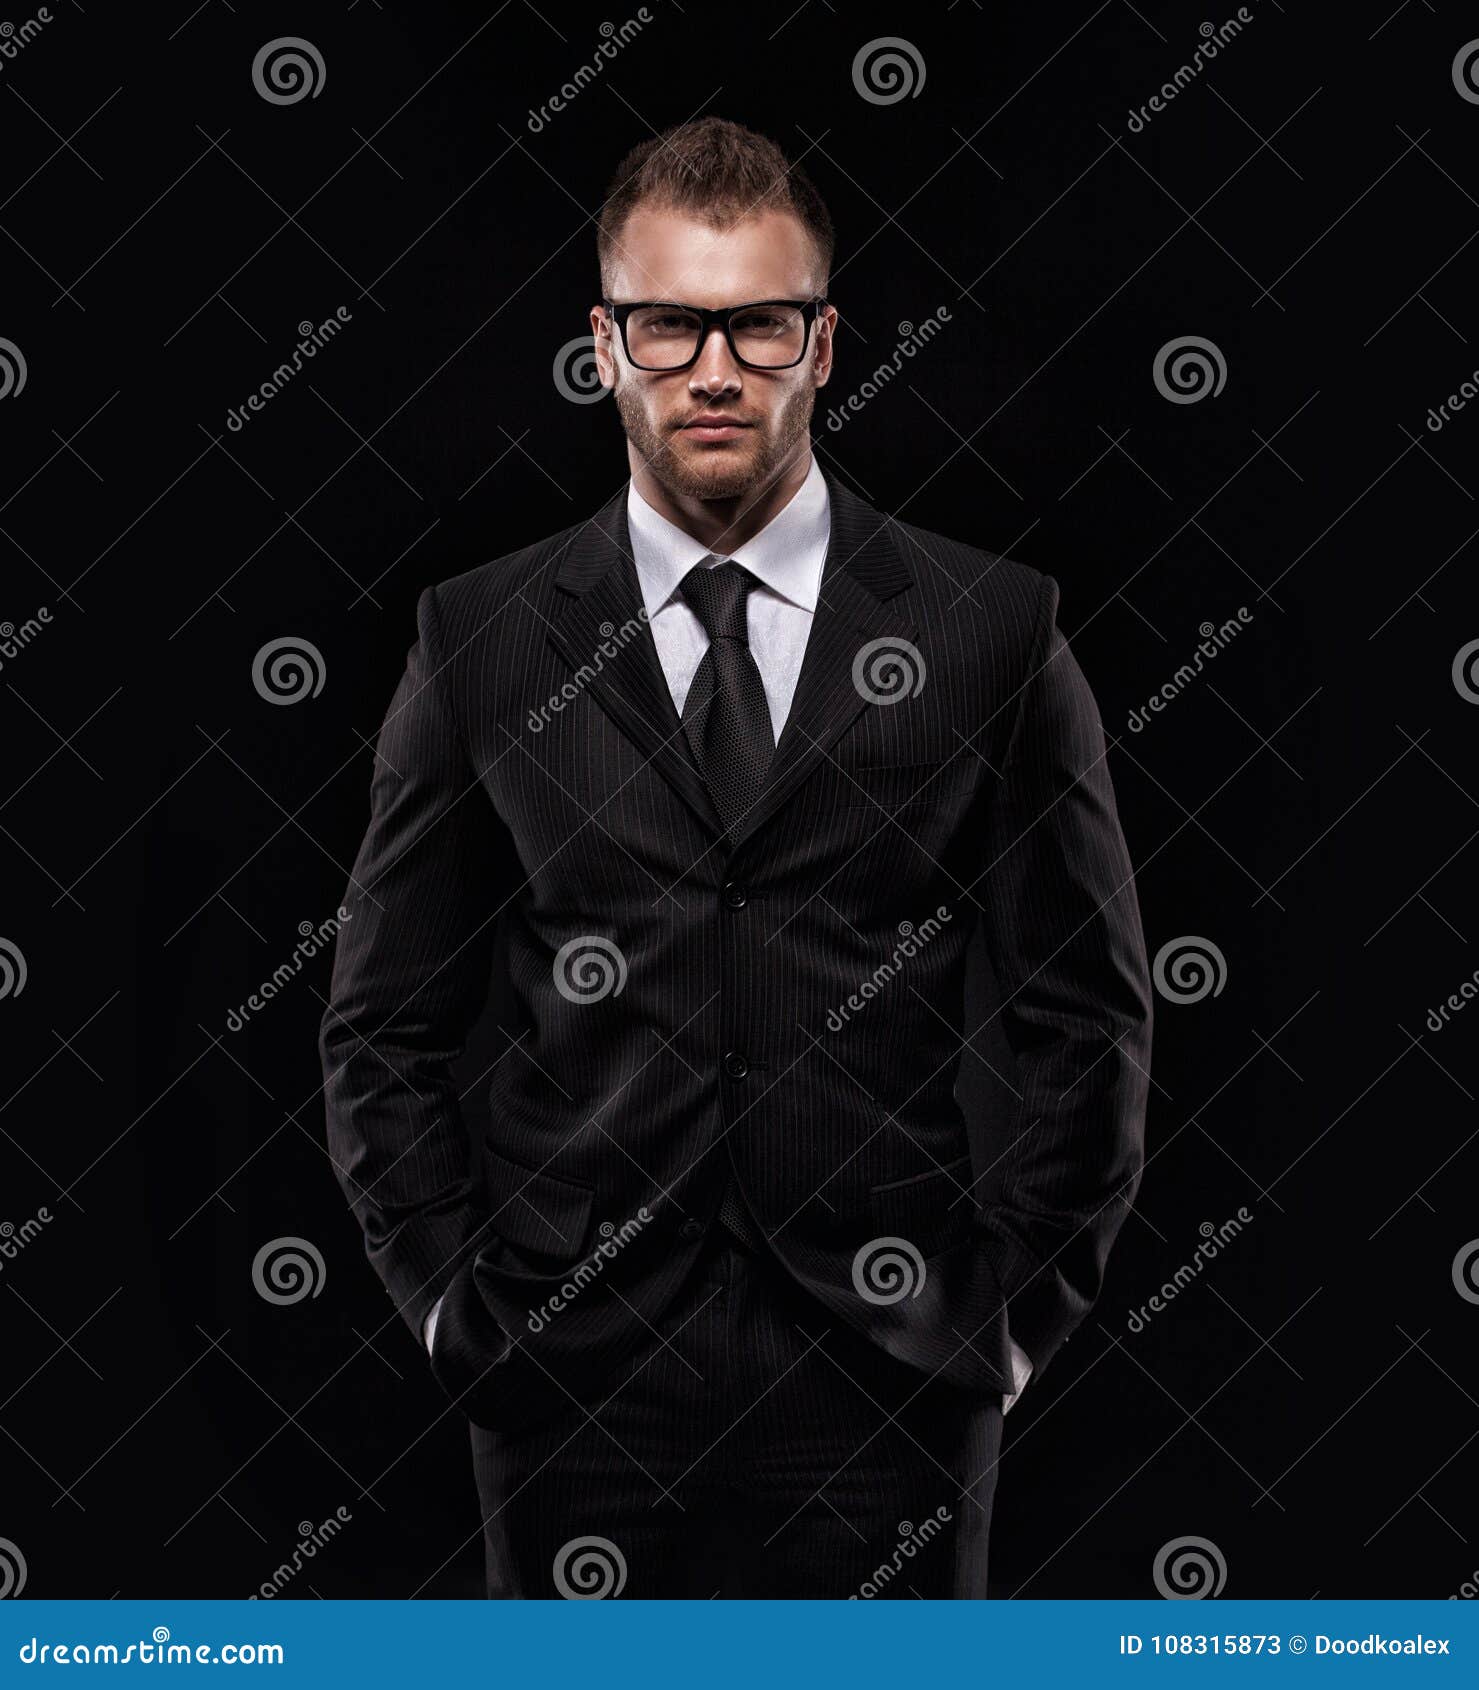 Businessmanman In Black Suit And Glasses Stock Image - Image of male ...